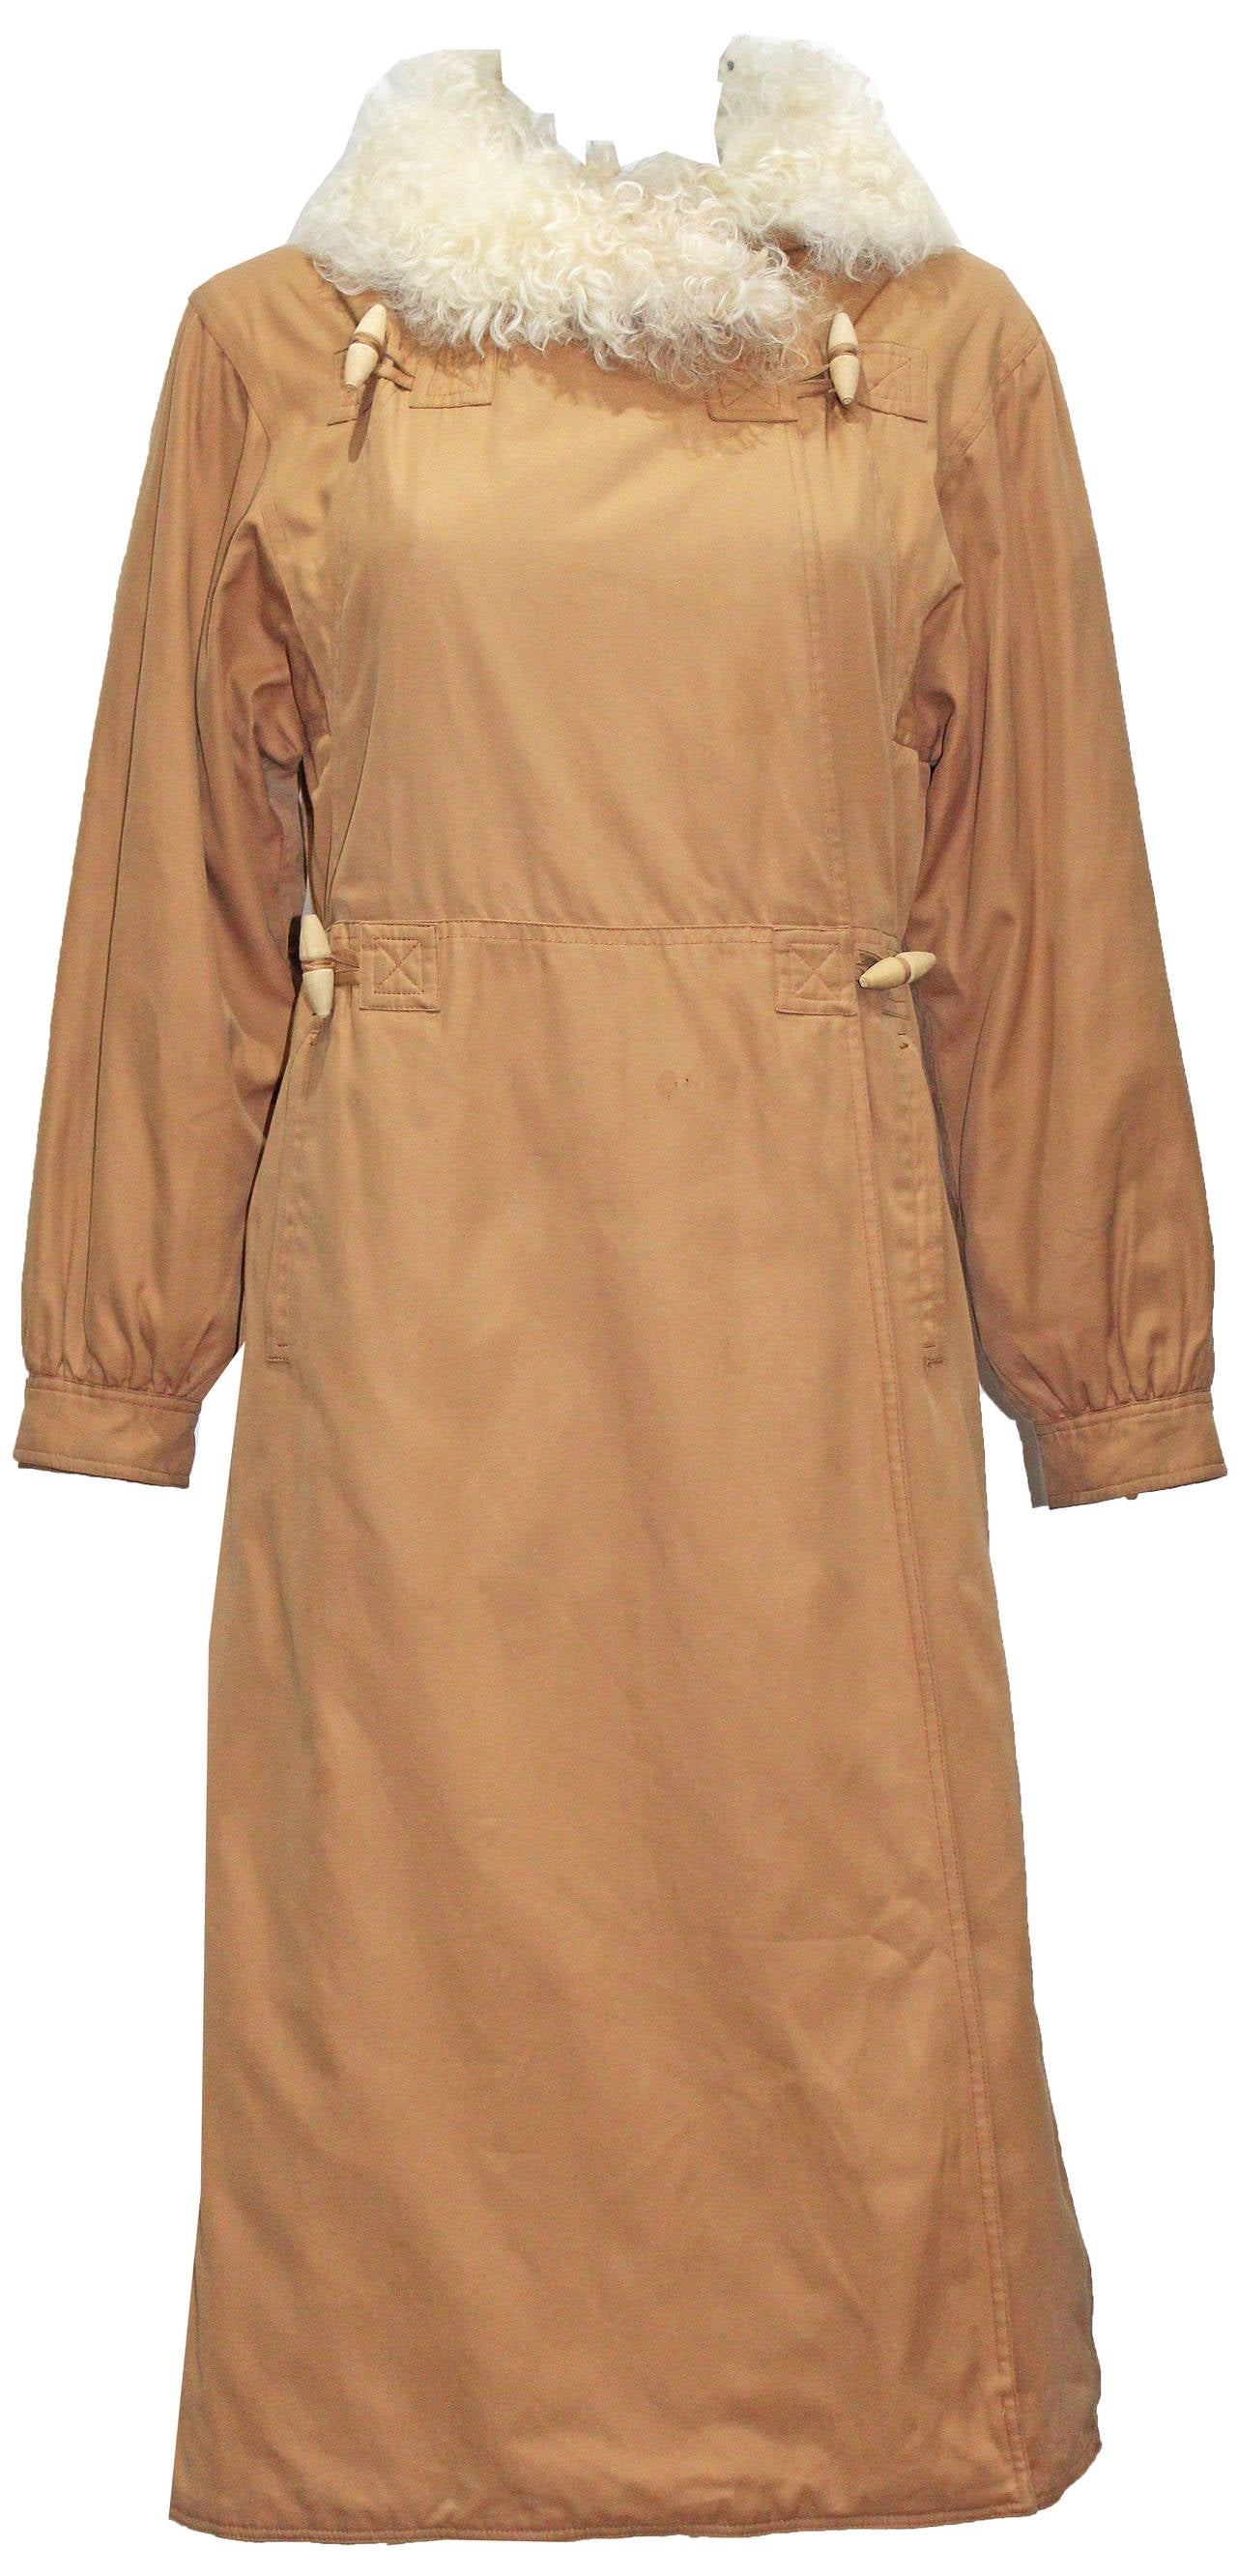 A fine and rare cotton tan coat by Courreges from the 1960s. The coat has a Mongolian lamb collar, wooden toggle buttons and quilted lining.